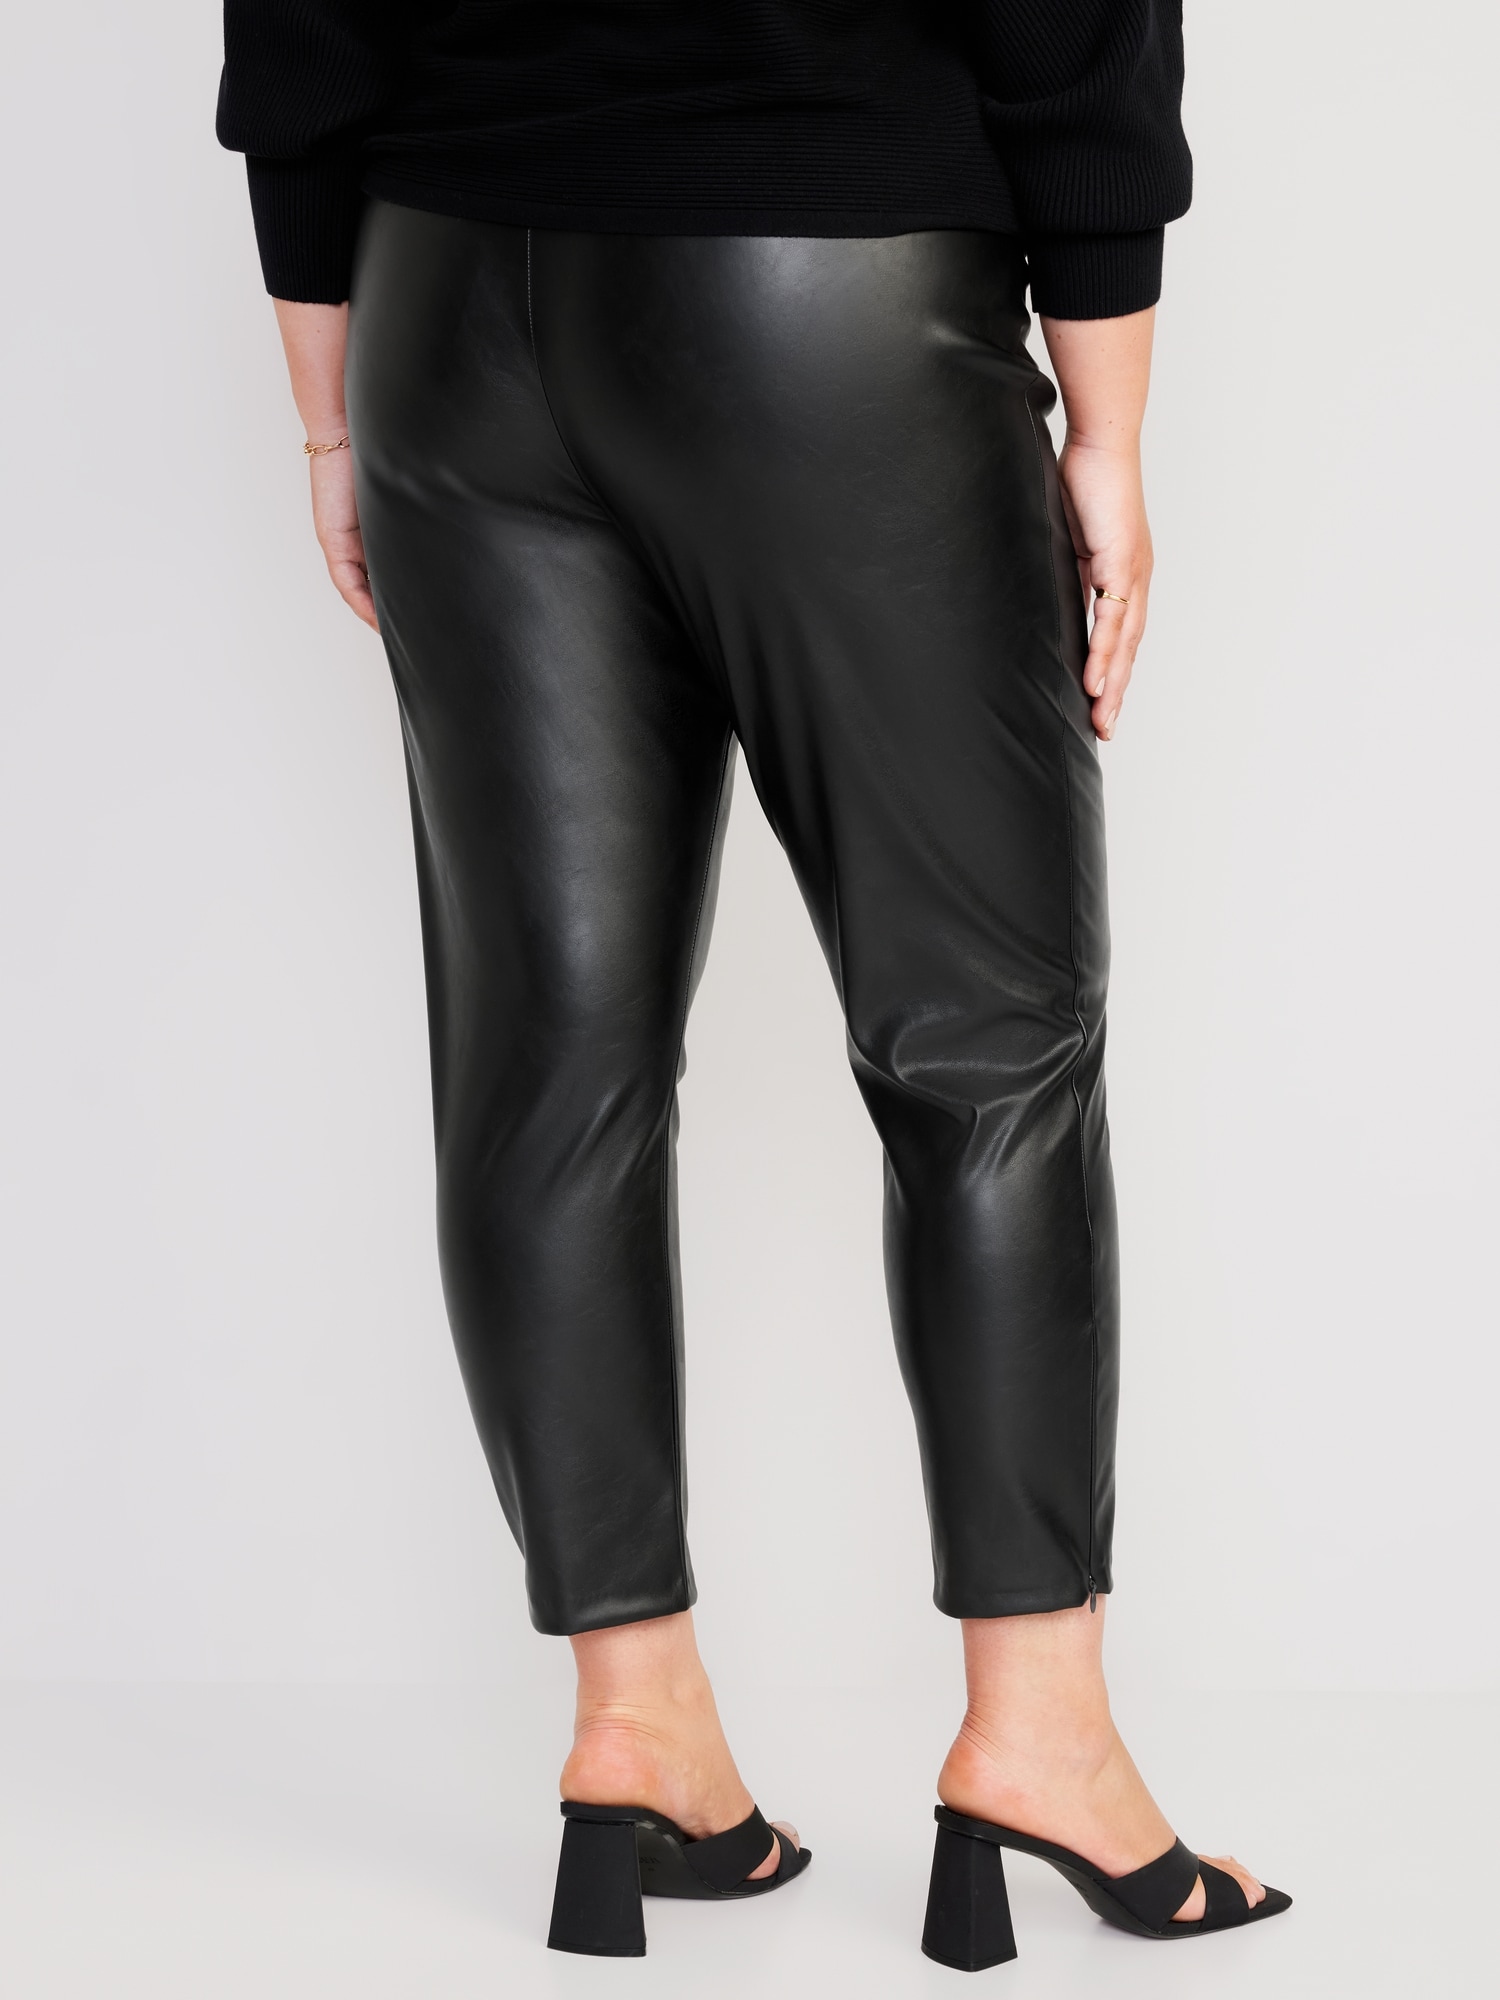 Extra High-Waisted Faux Leather Pants for Women